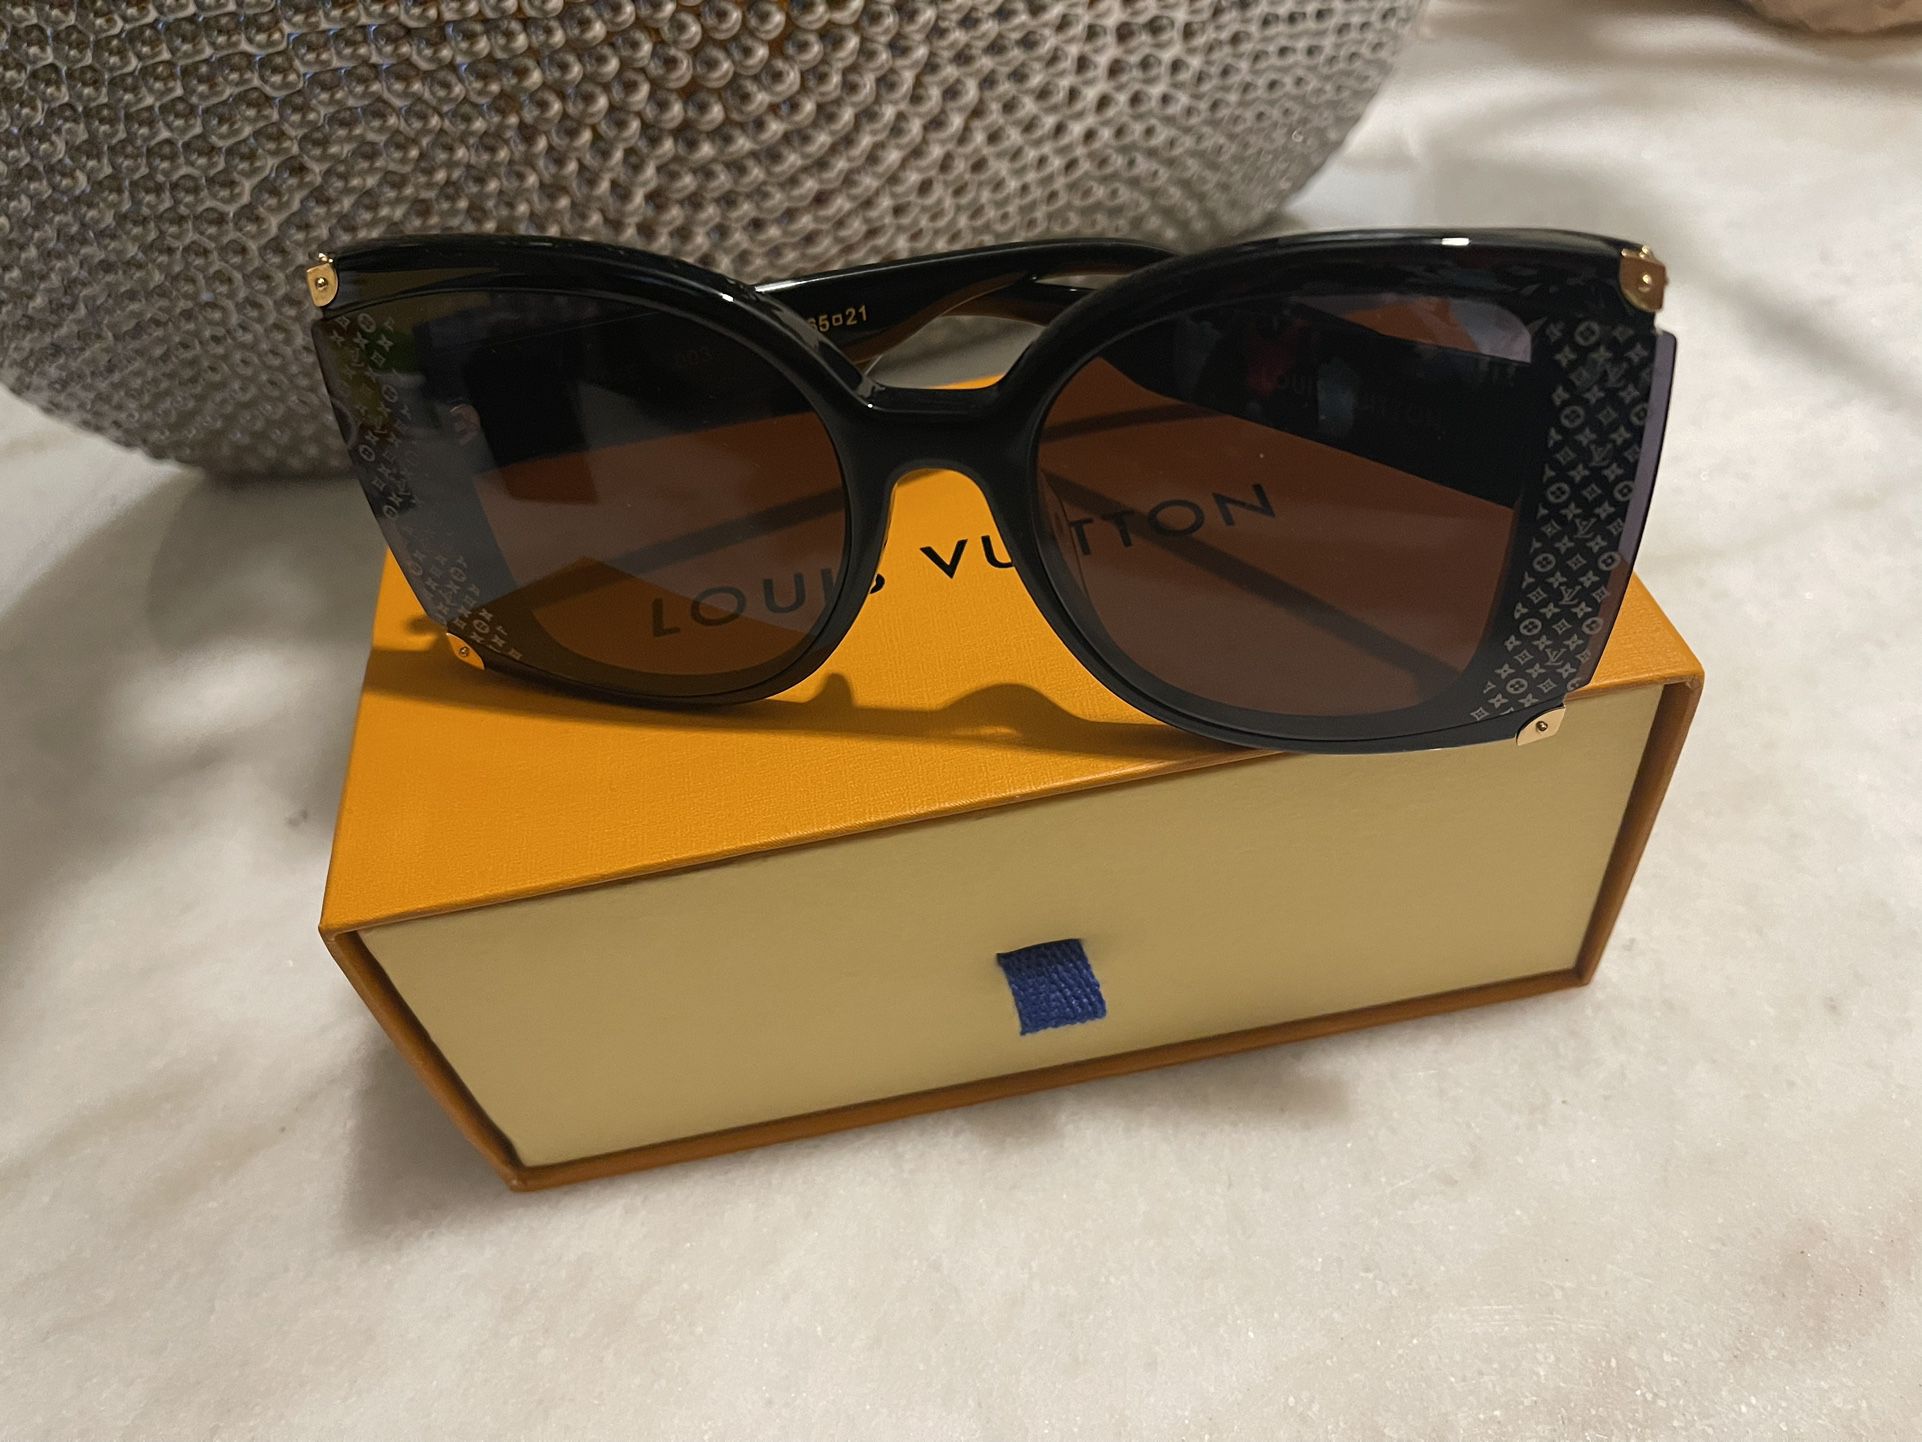 High Quality LV Sunglasses Women for Sale in Obetz, OH - OfferUp